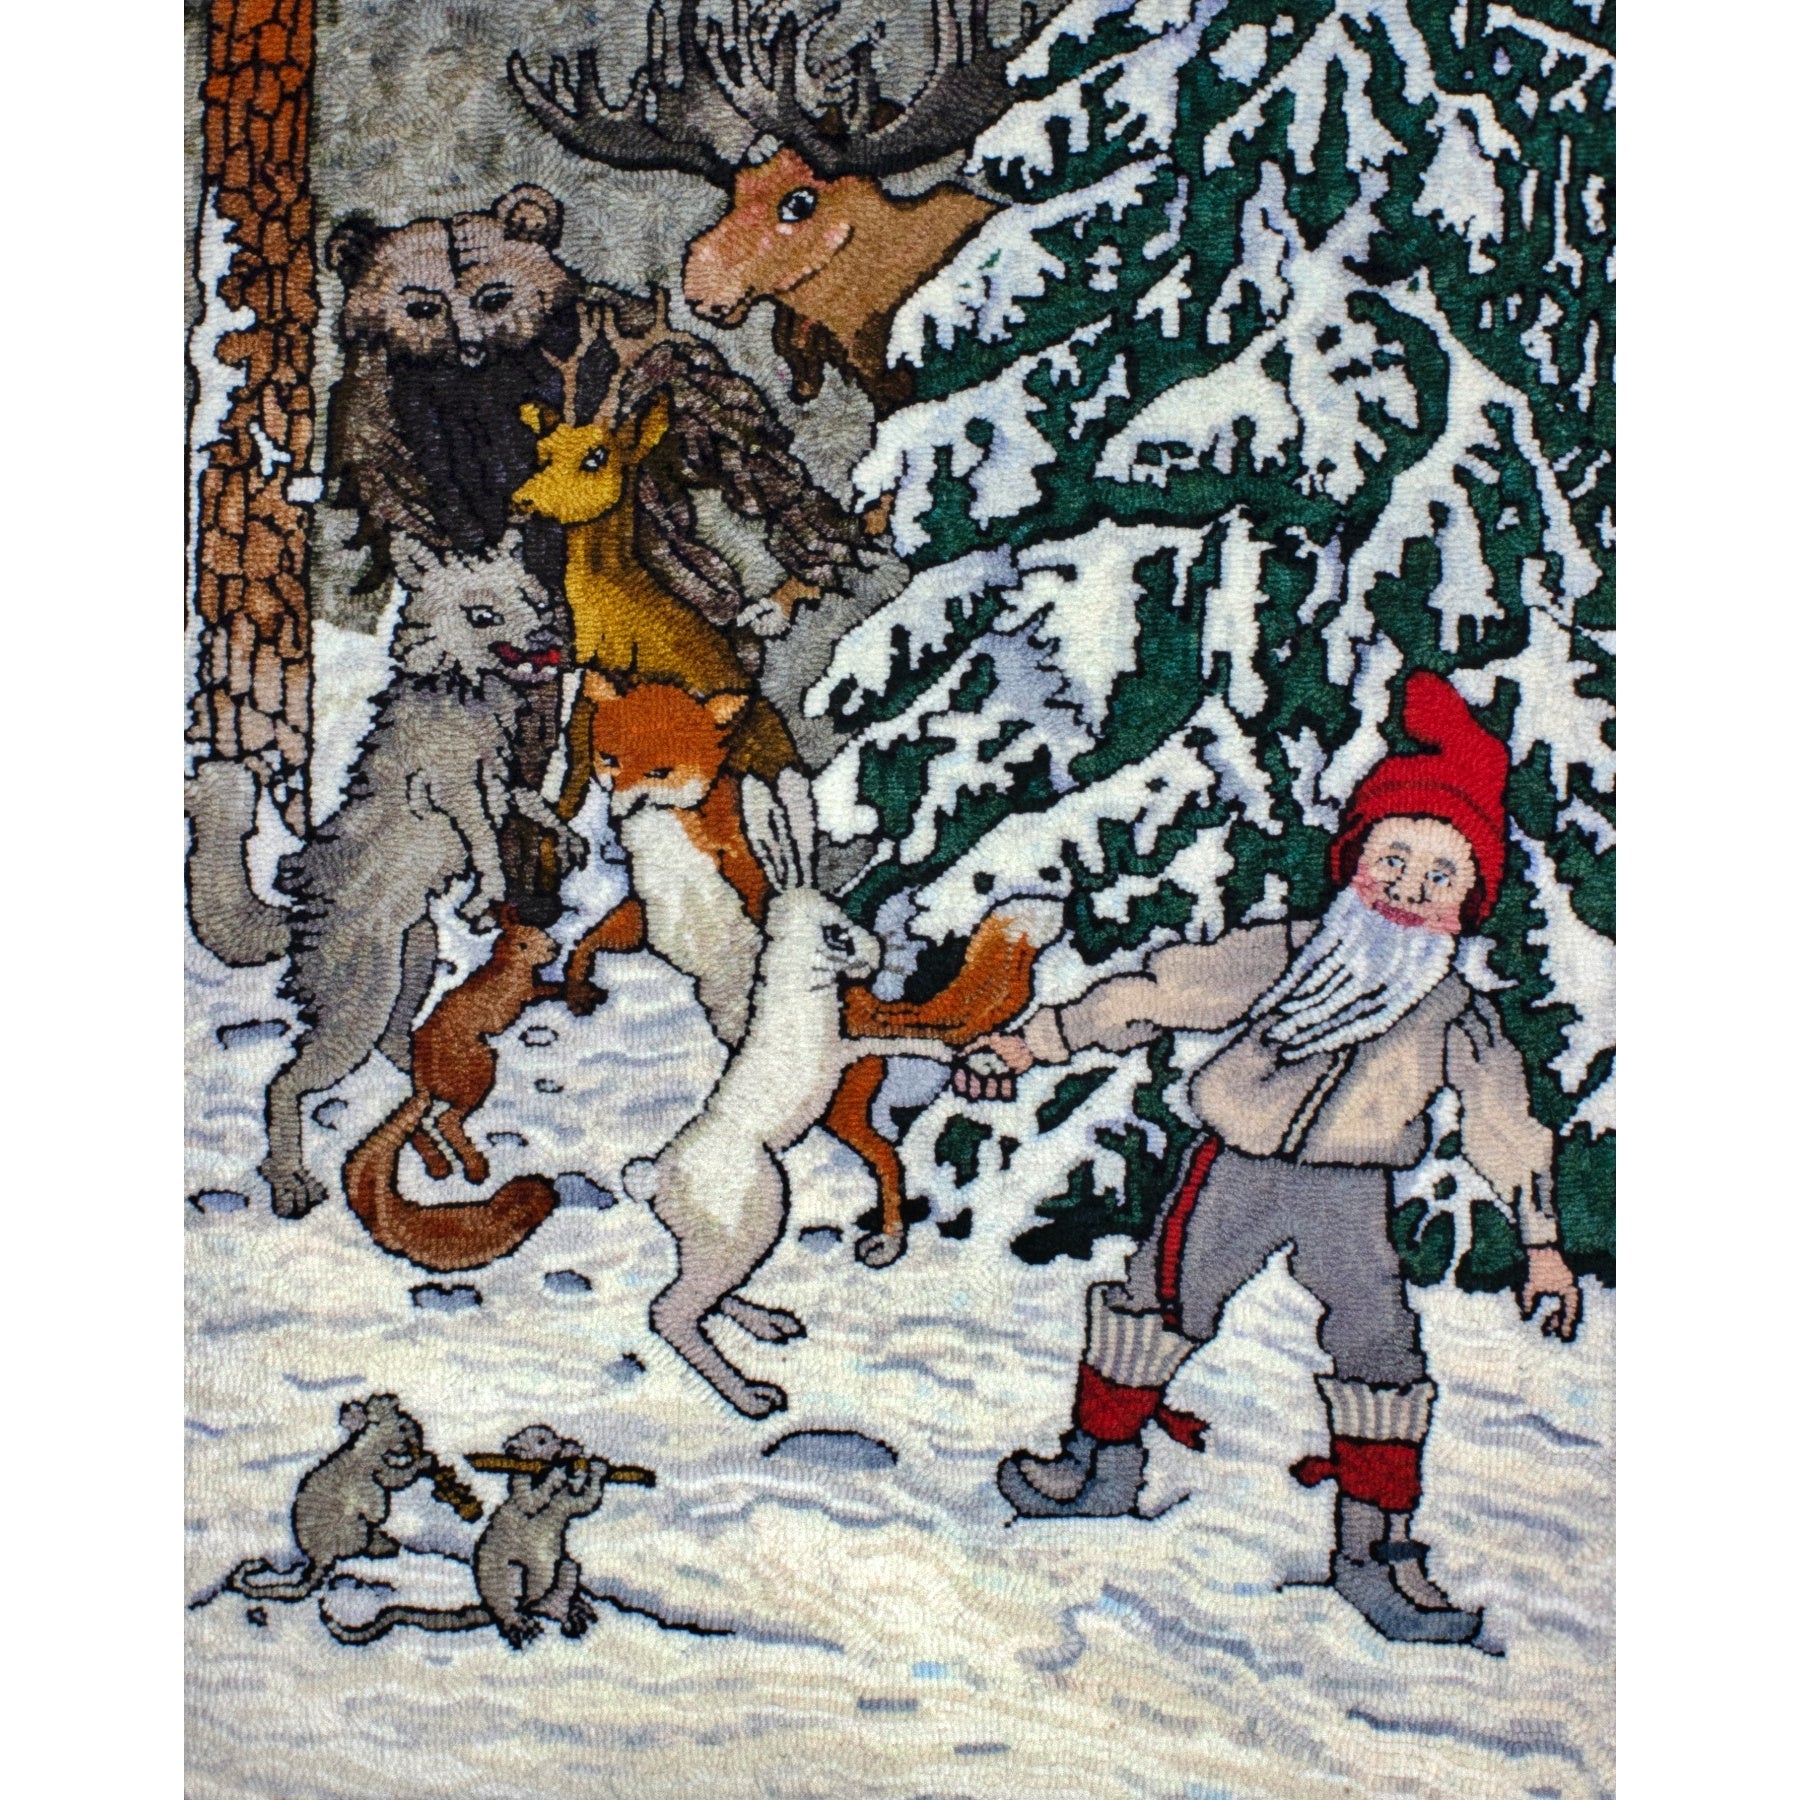  Gnome Leading Animals, ill. Elsa Beskow, 1874, rug hooked by Lisa Chaloner